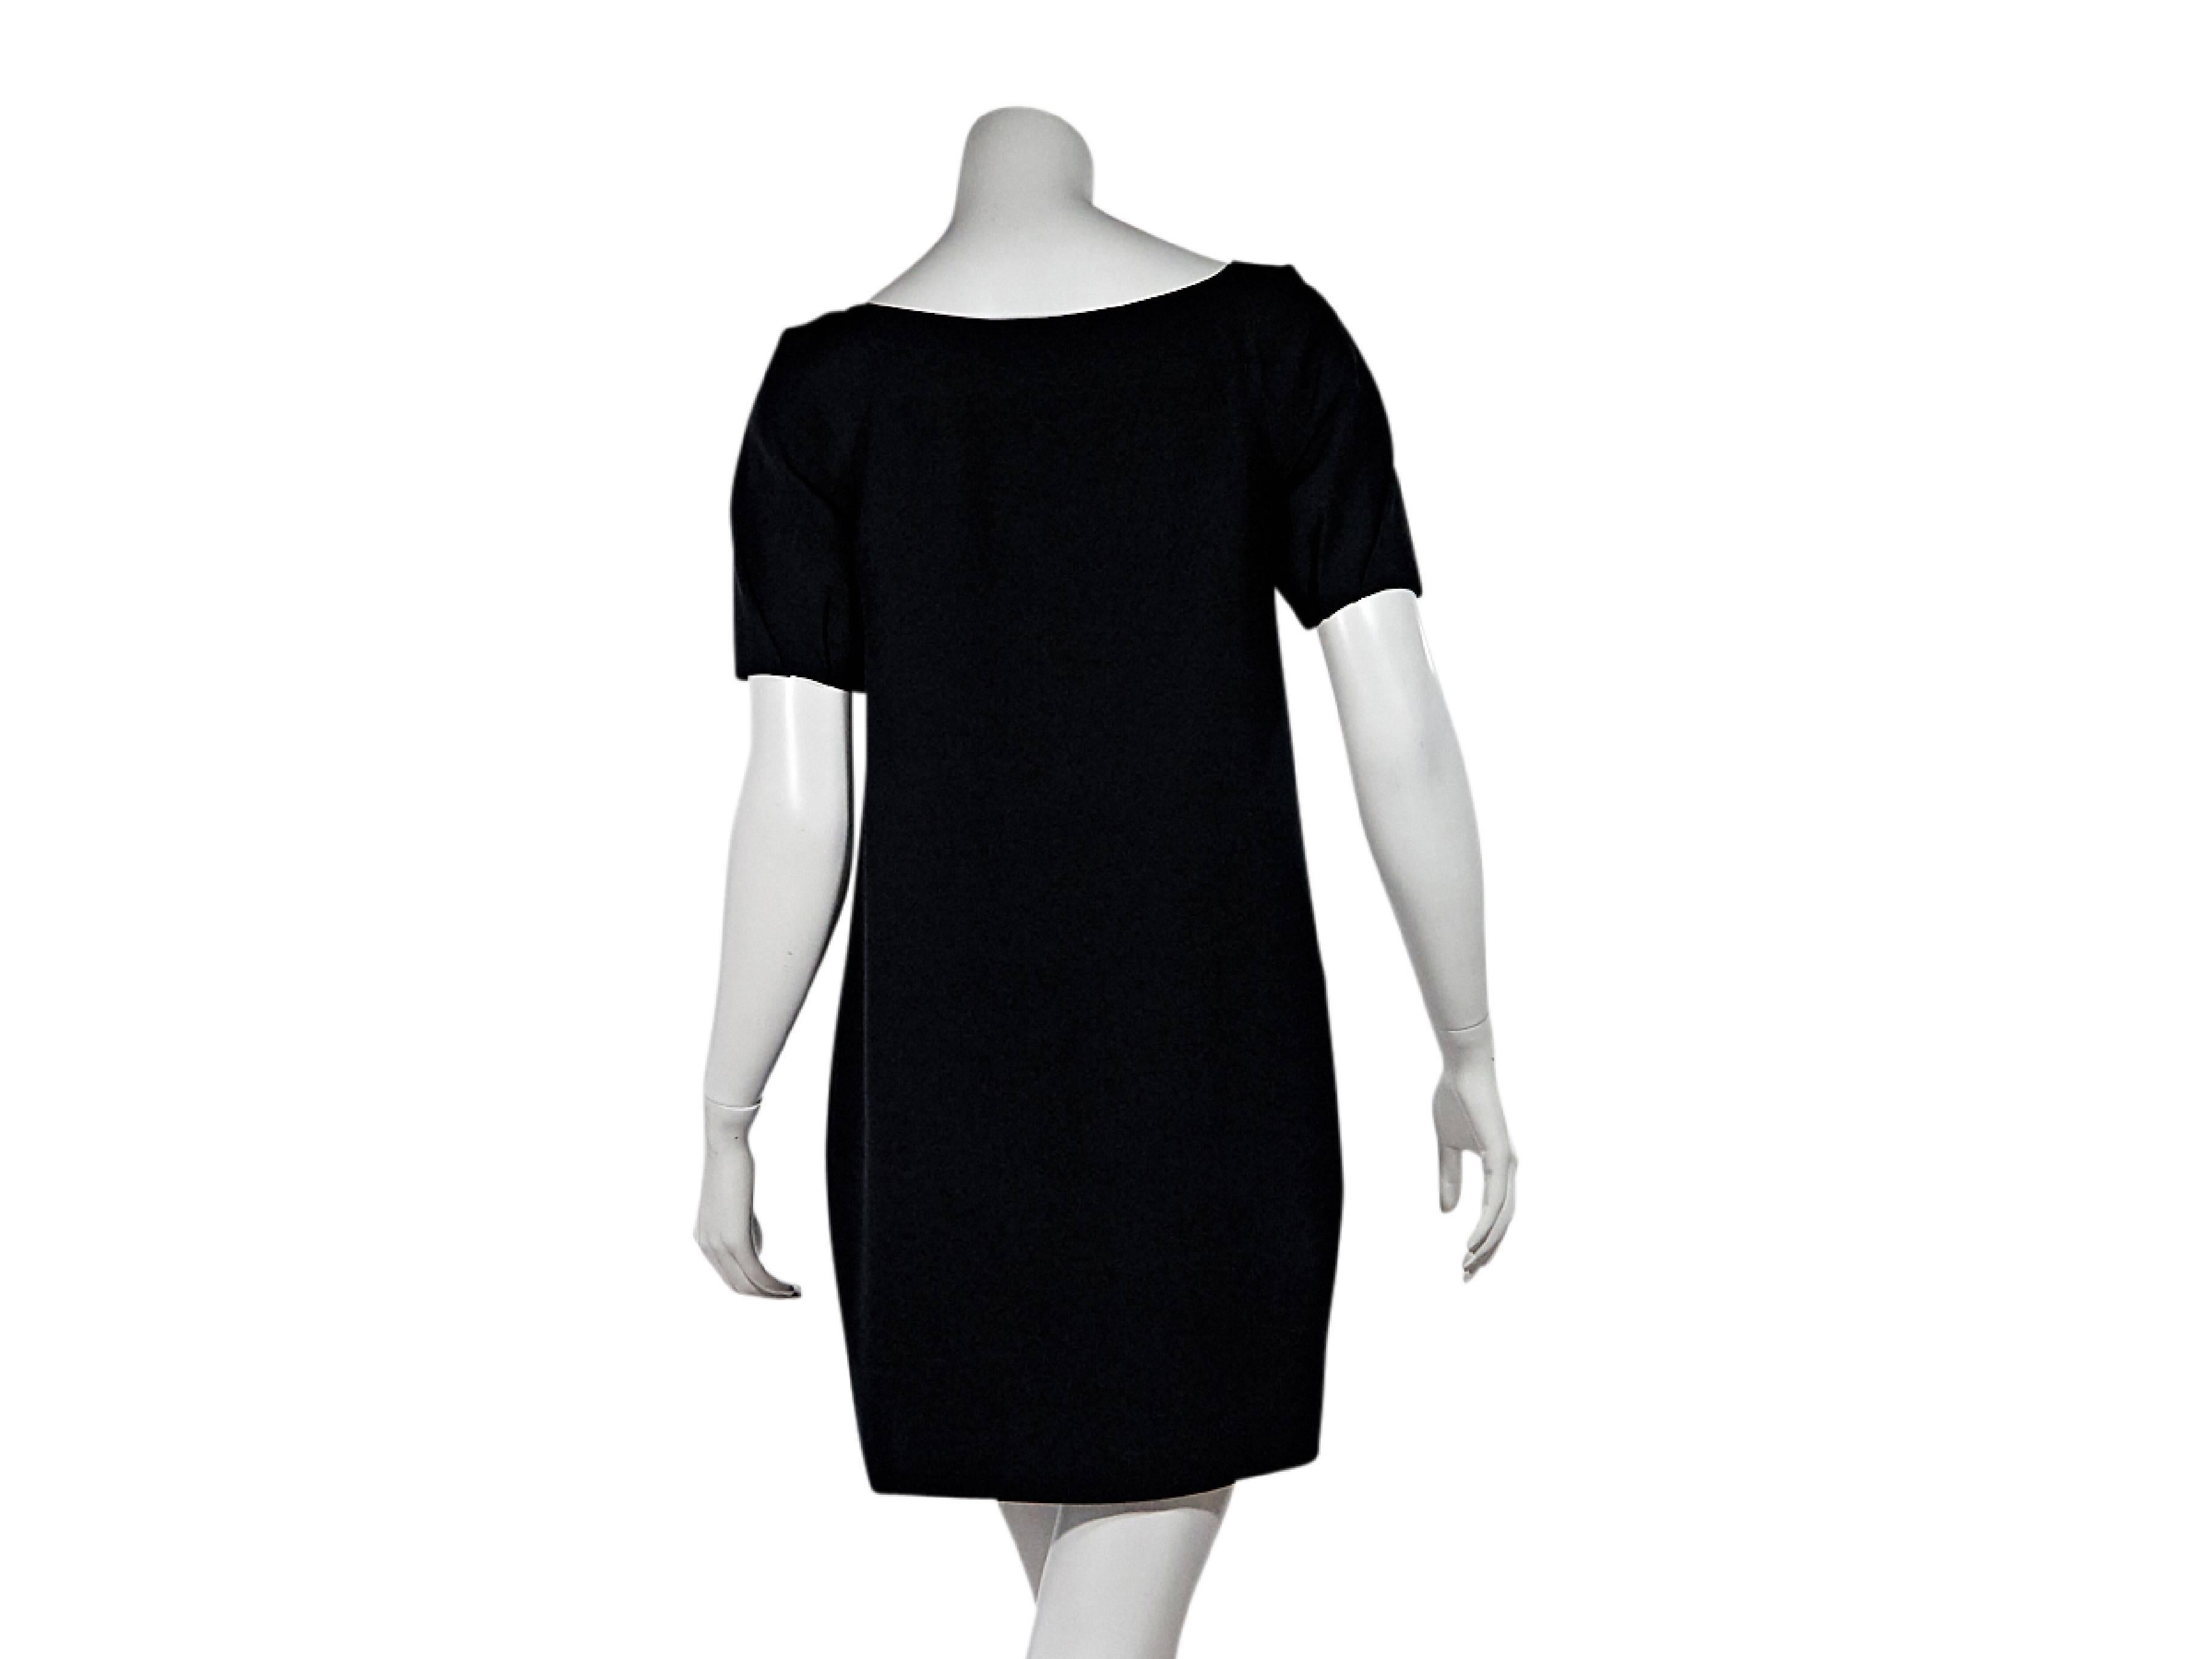 Product details:  Black shift dress by Chloé.  Features a cutout detail.  Wide scoopneck.  Short sleeves.  Pullover style. 
Condition: Pre-owned. Very good.

Est. Retail $ 428.00
